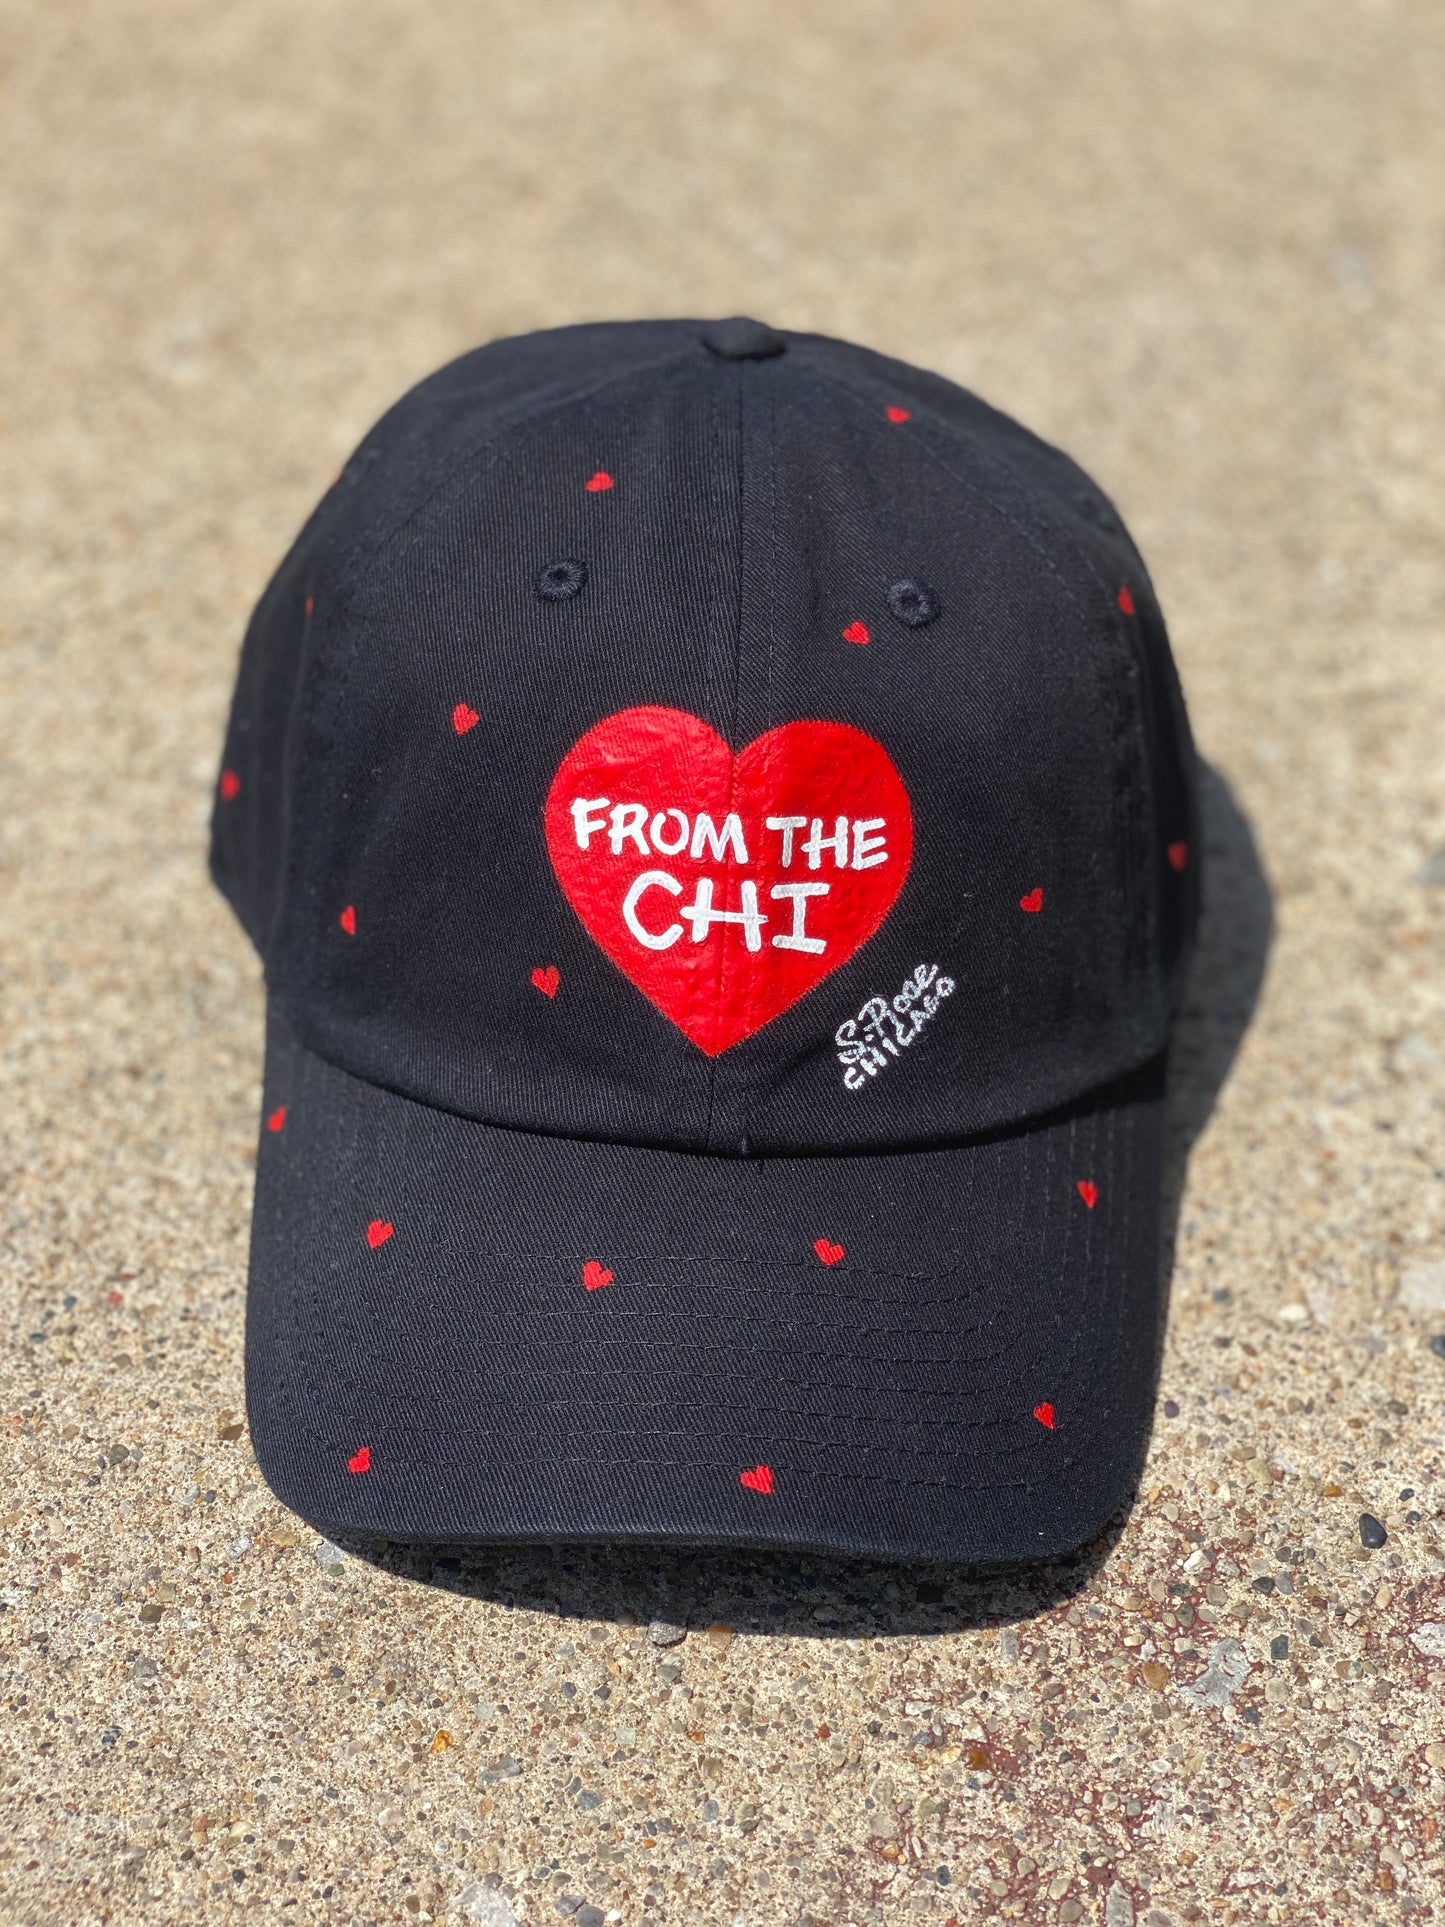 “From The Chi” Hand Painted Strap Back Hat (black)